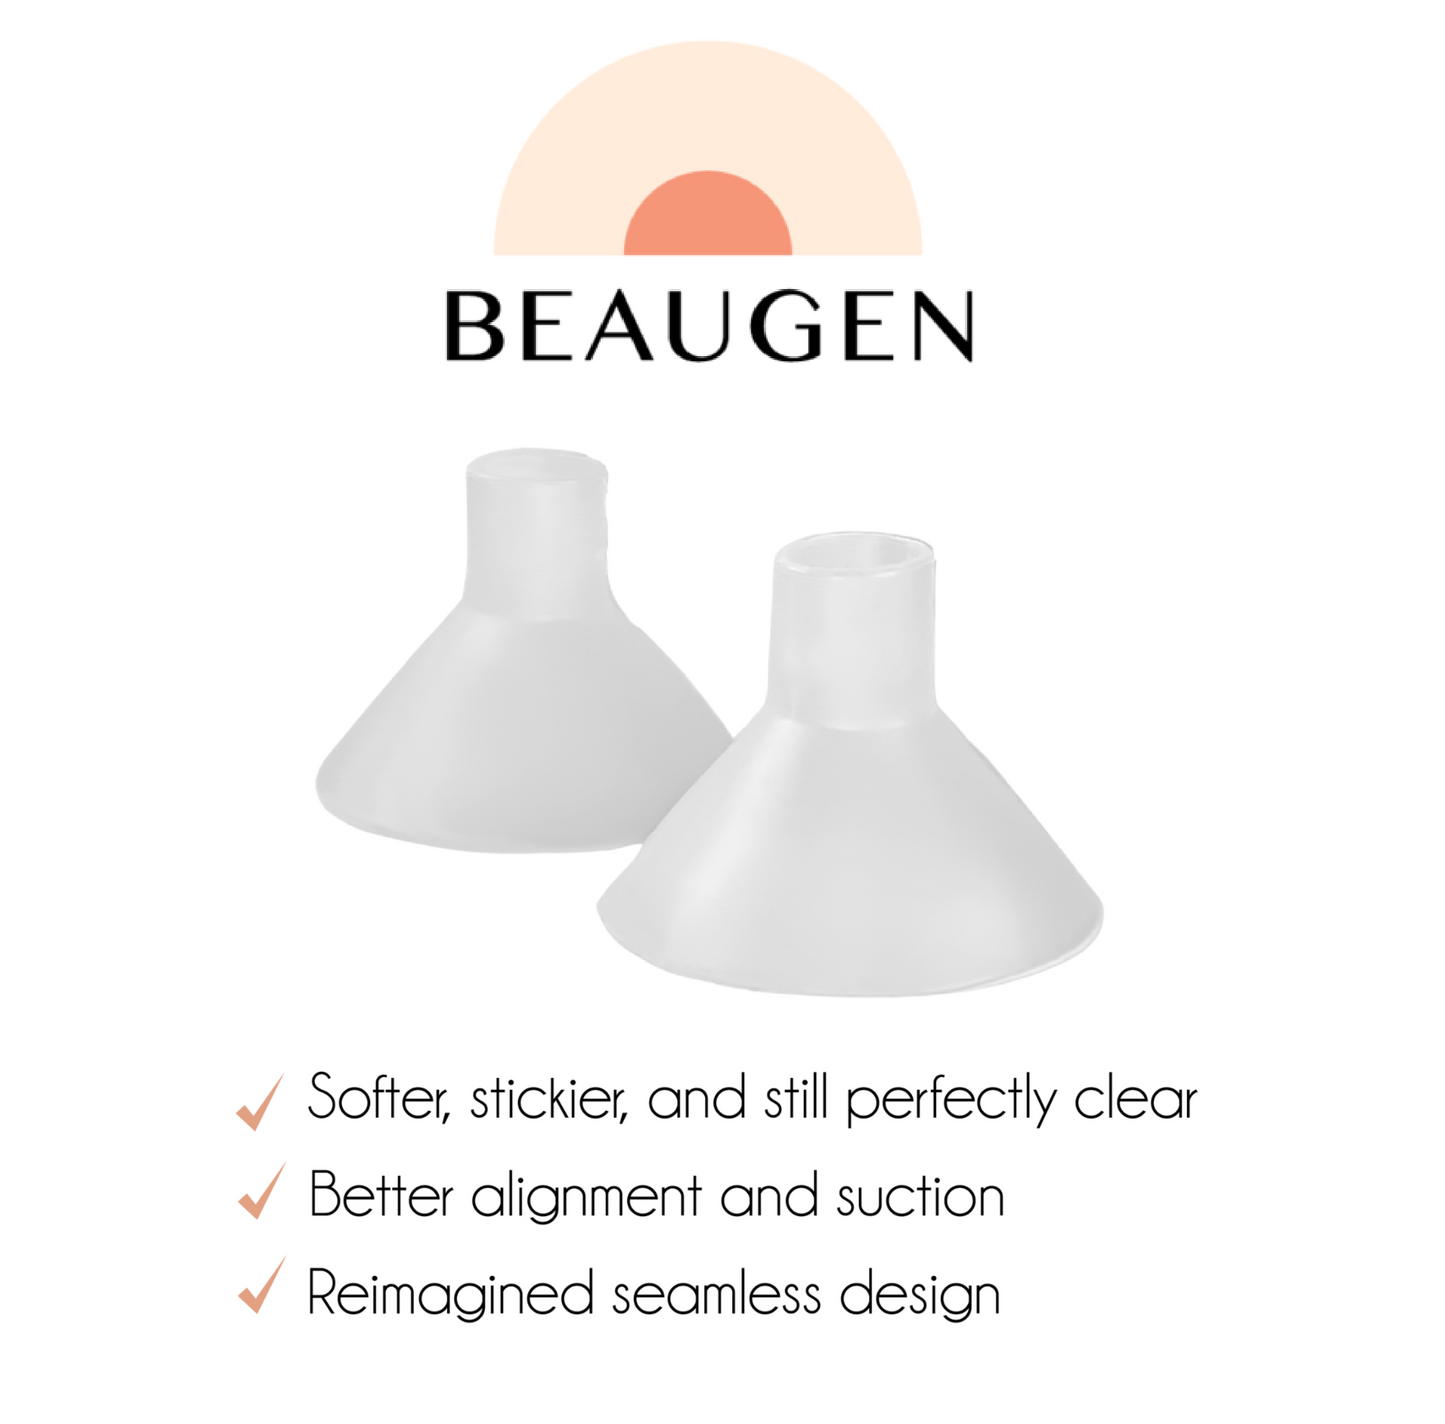 BeauGen redesigned the breast pump flange inserts to be softer, stickier, and perfectly clear!